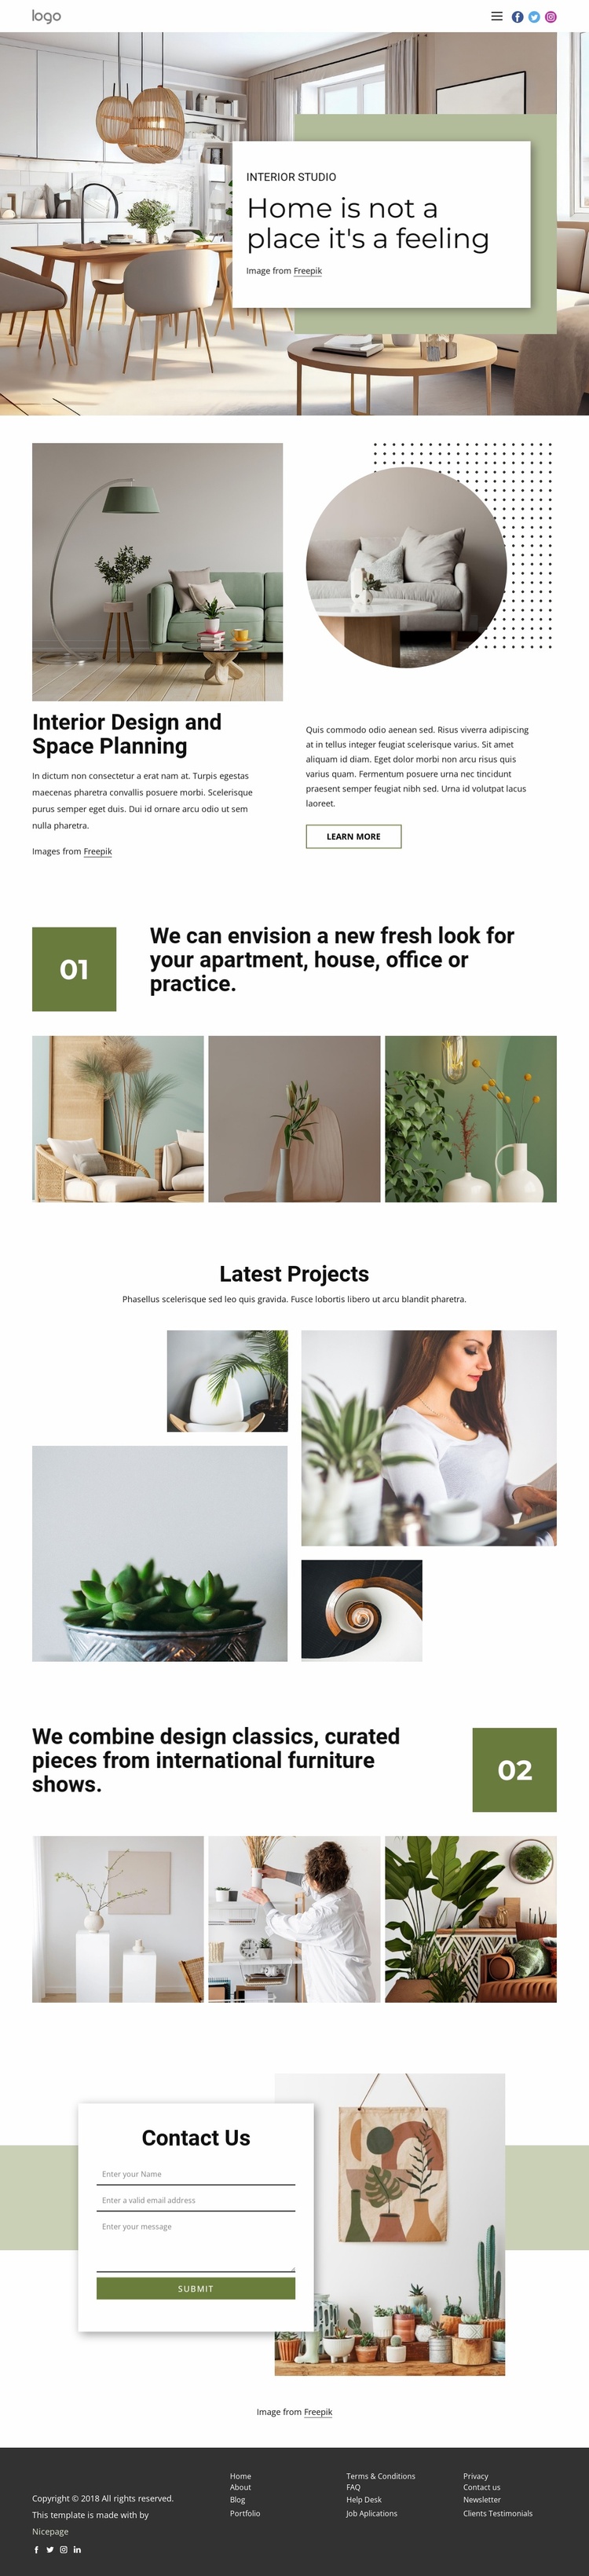 Interior designs for every taste Landing Page